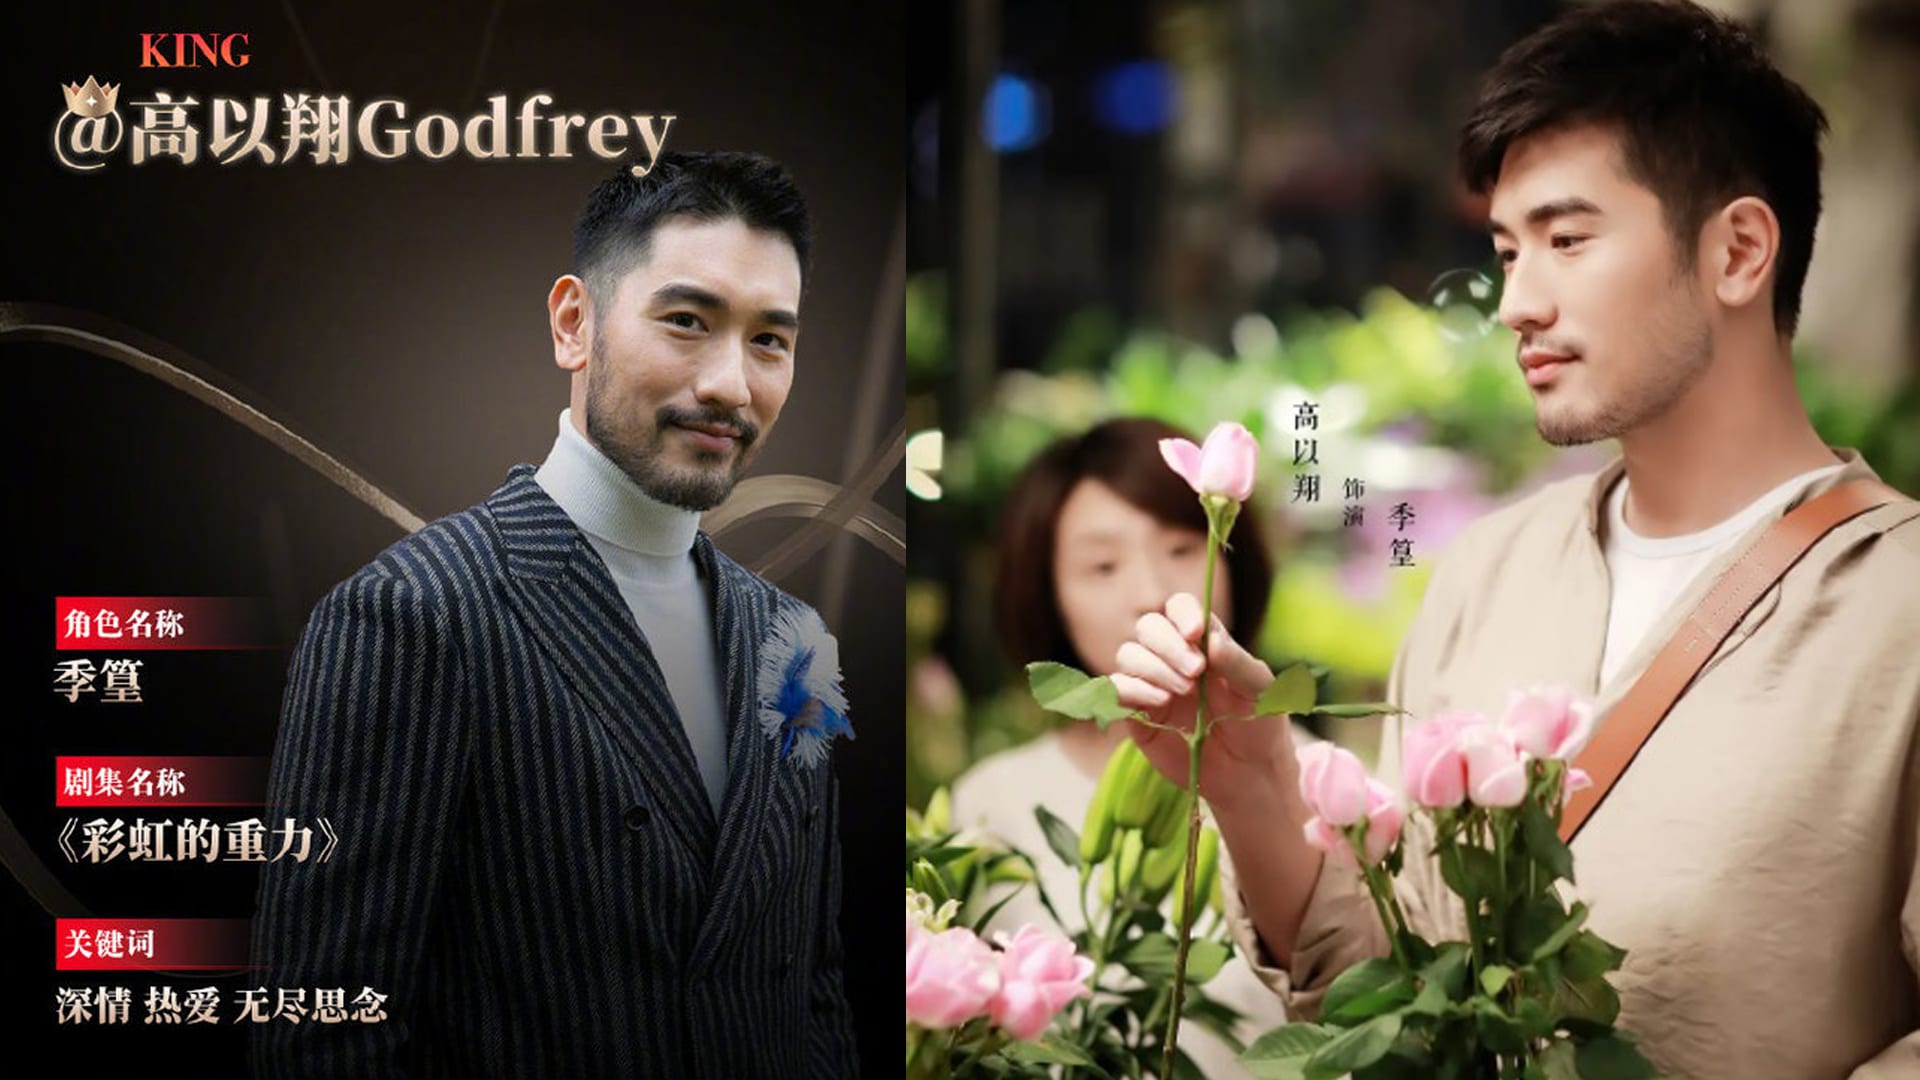 The Late Godfrey Gao Named Most Popular Actor In Weibo TV Series Awards